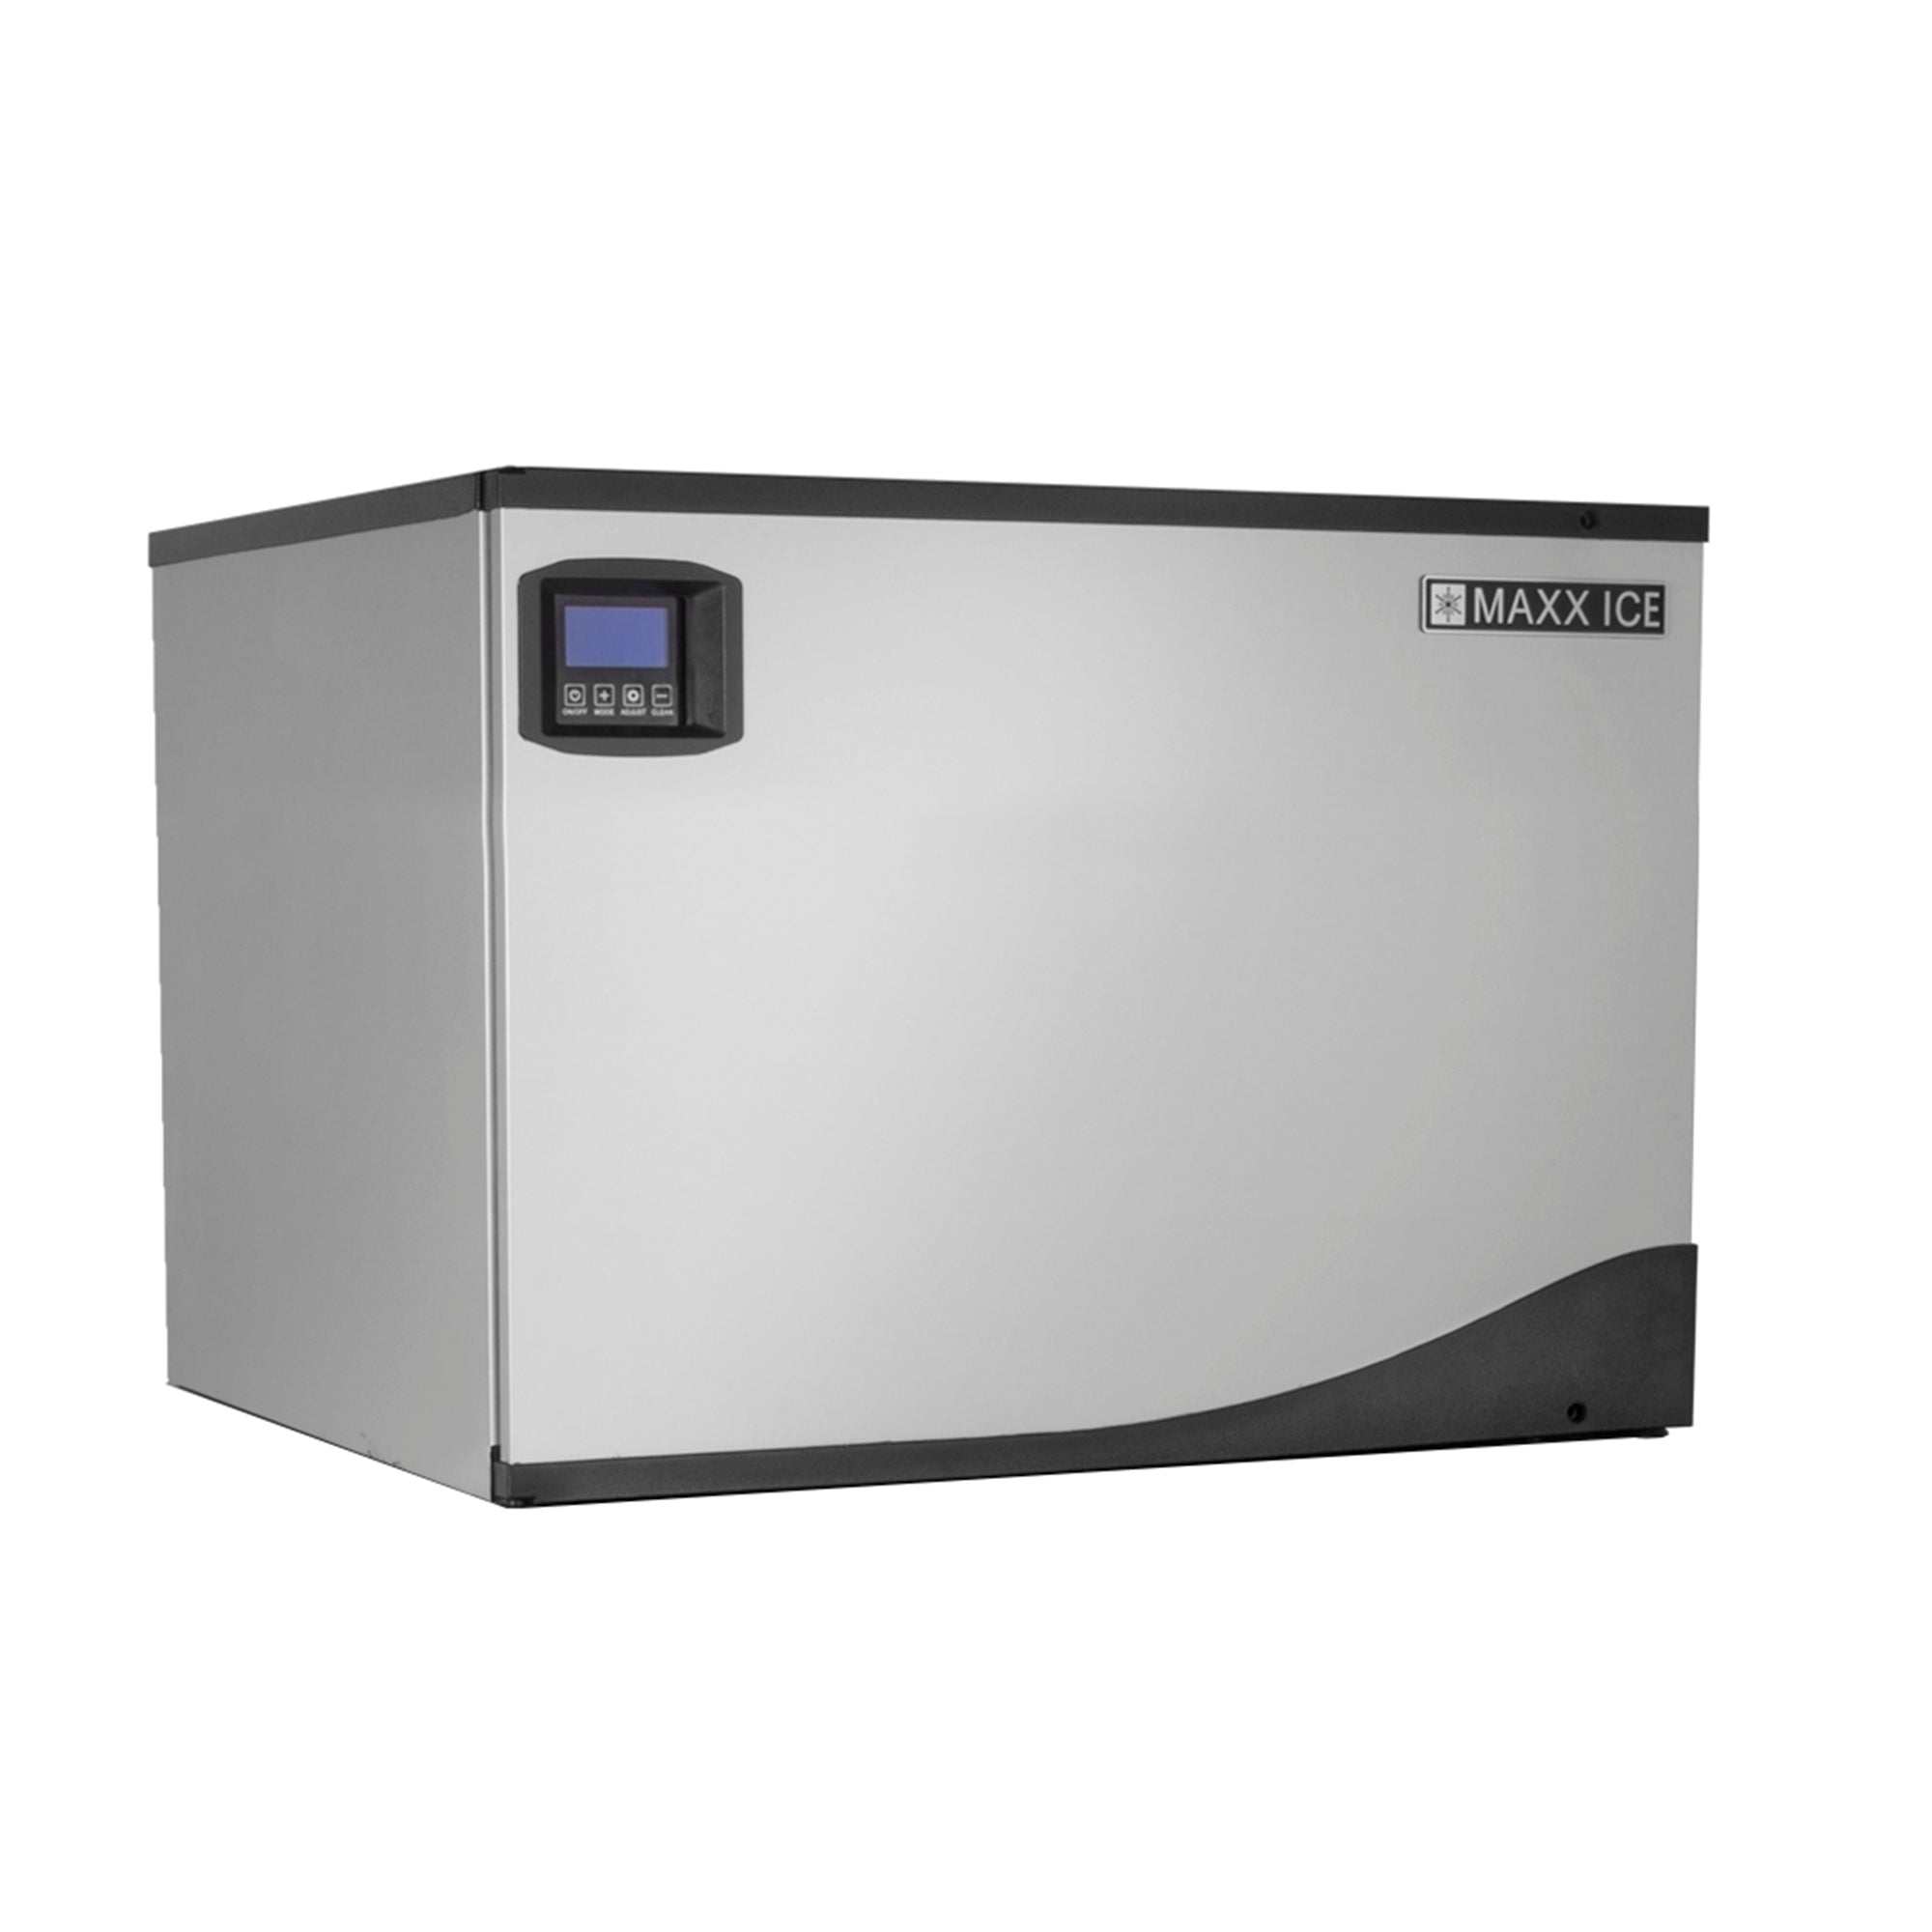 Maxx Ice - MIM370NH, Maxx Ice Intelligent Series Modular Ice Machine, 30"W, 361 lbs, Half Dice Ice Cubes, Energy Star Listed, in Stainless Steel